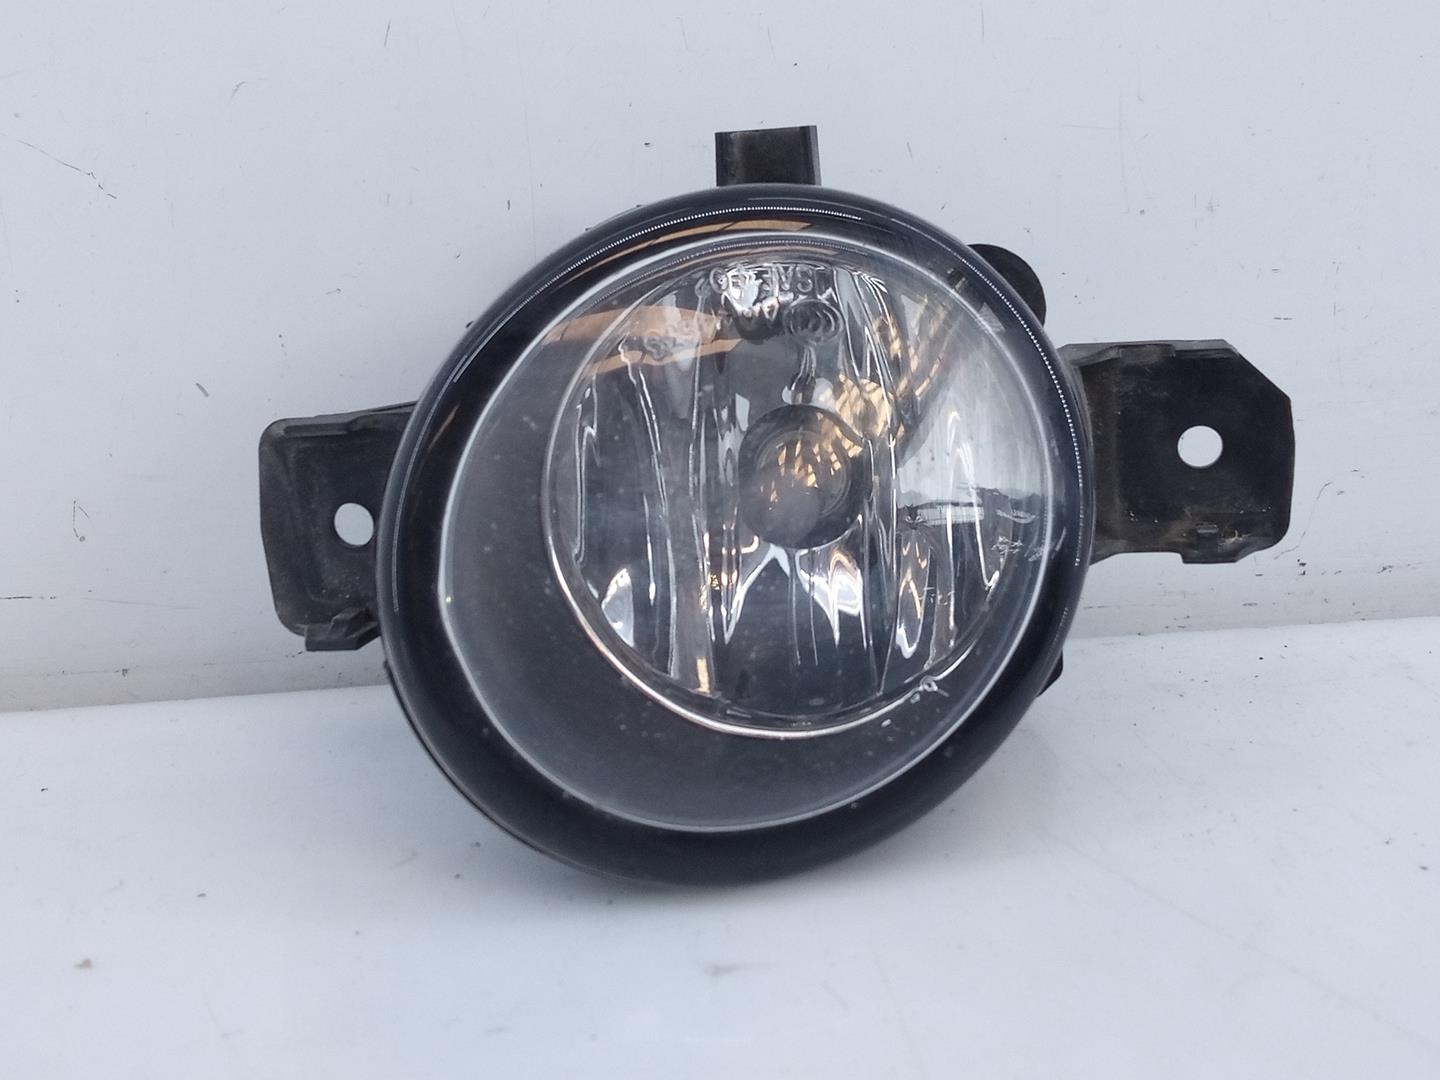 RENAULT Front Right Fog Light 8200002470, 89201781, E1-A1-7-2 23296045